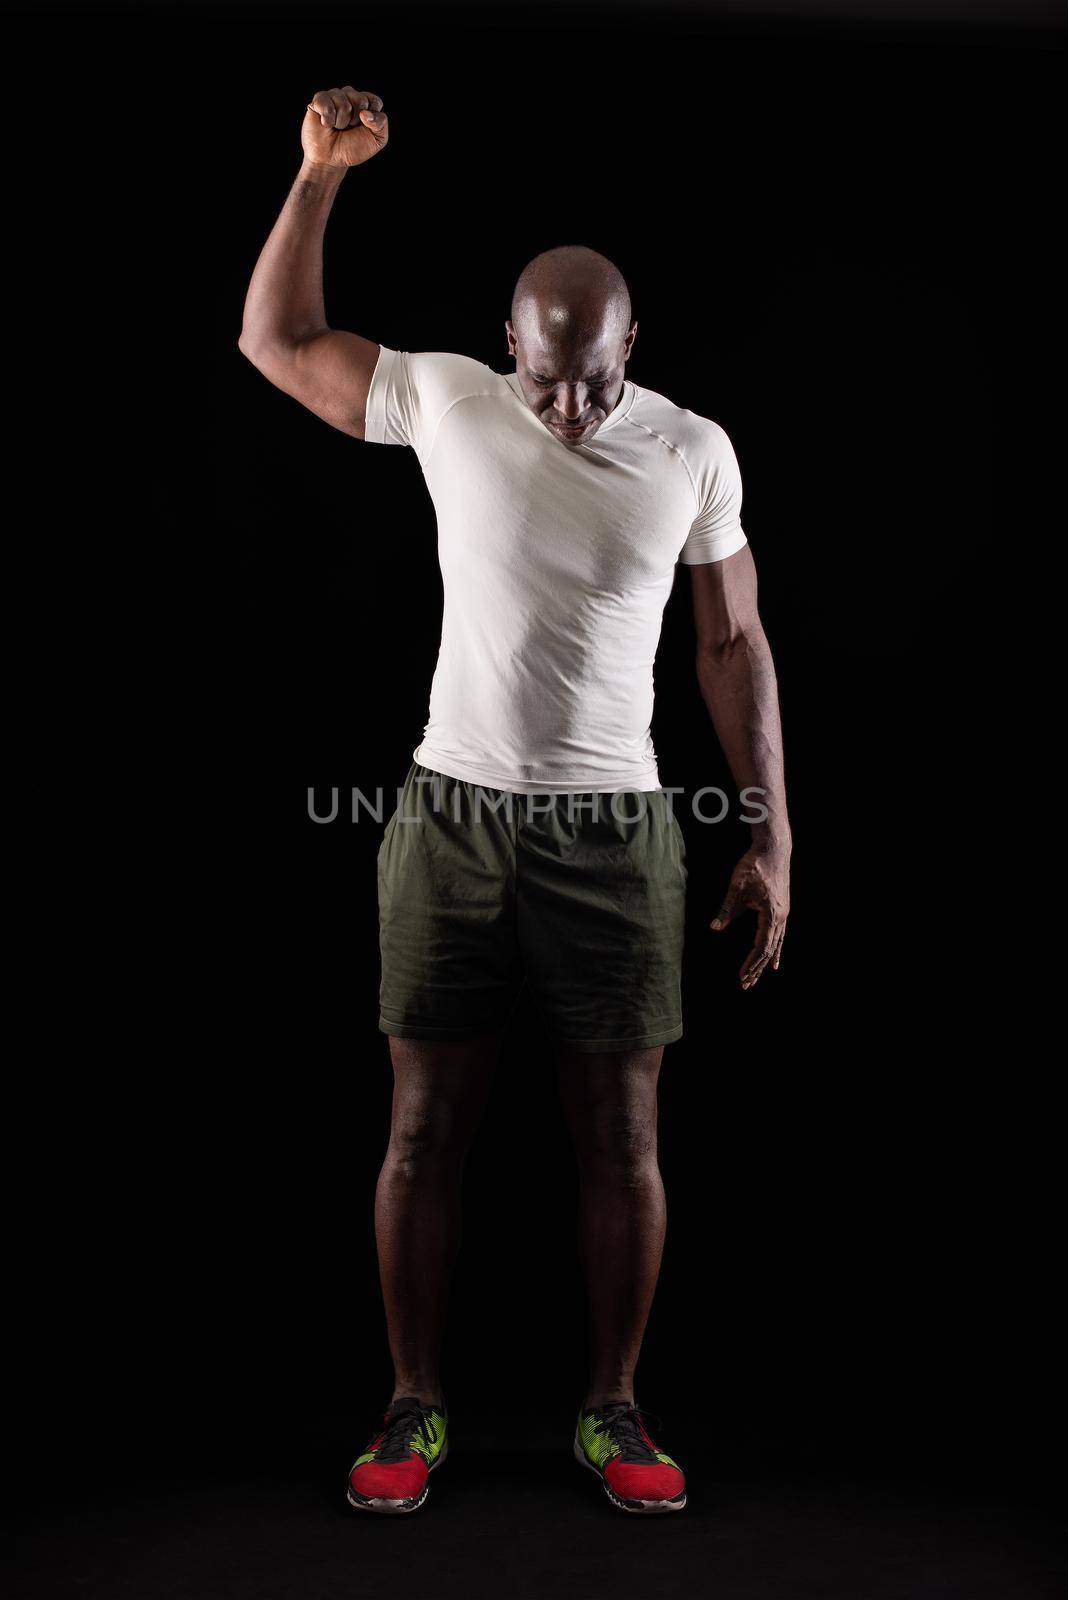 African American male standing with one arm raised and fist clenched while looking down. Muscular adult man in sportswear in a studio with black background.